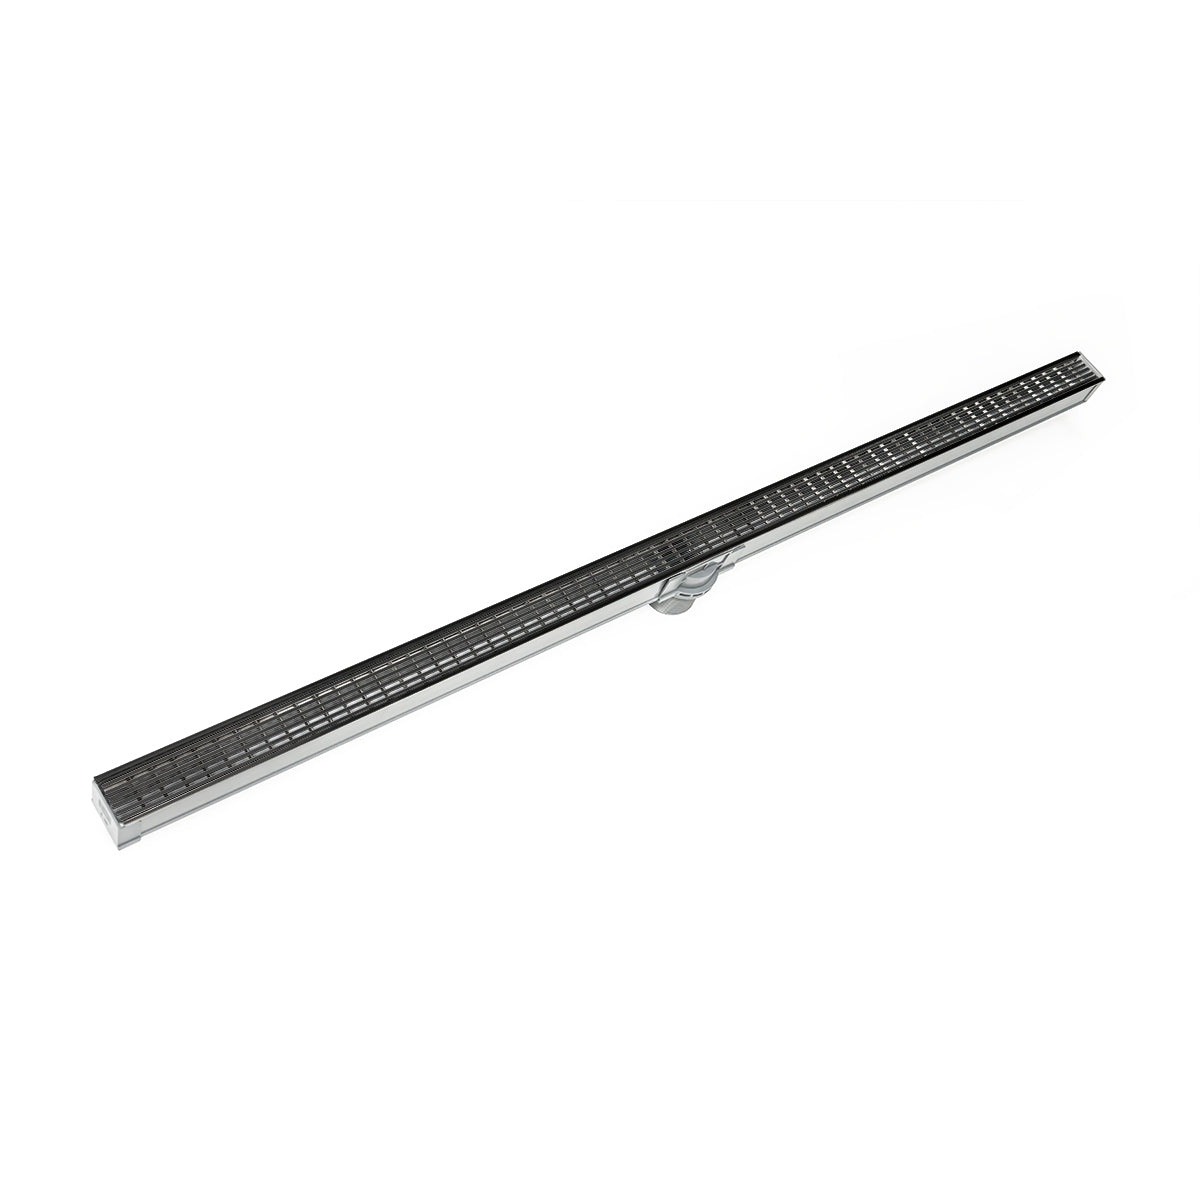 Infinity Drain 48" S-PVC Series Site Sizable Linear Drain Kit with 1 1/2" Wedge Wire Grate